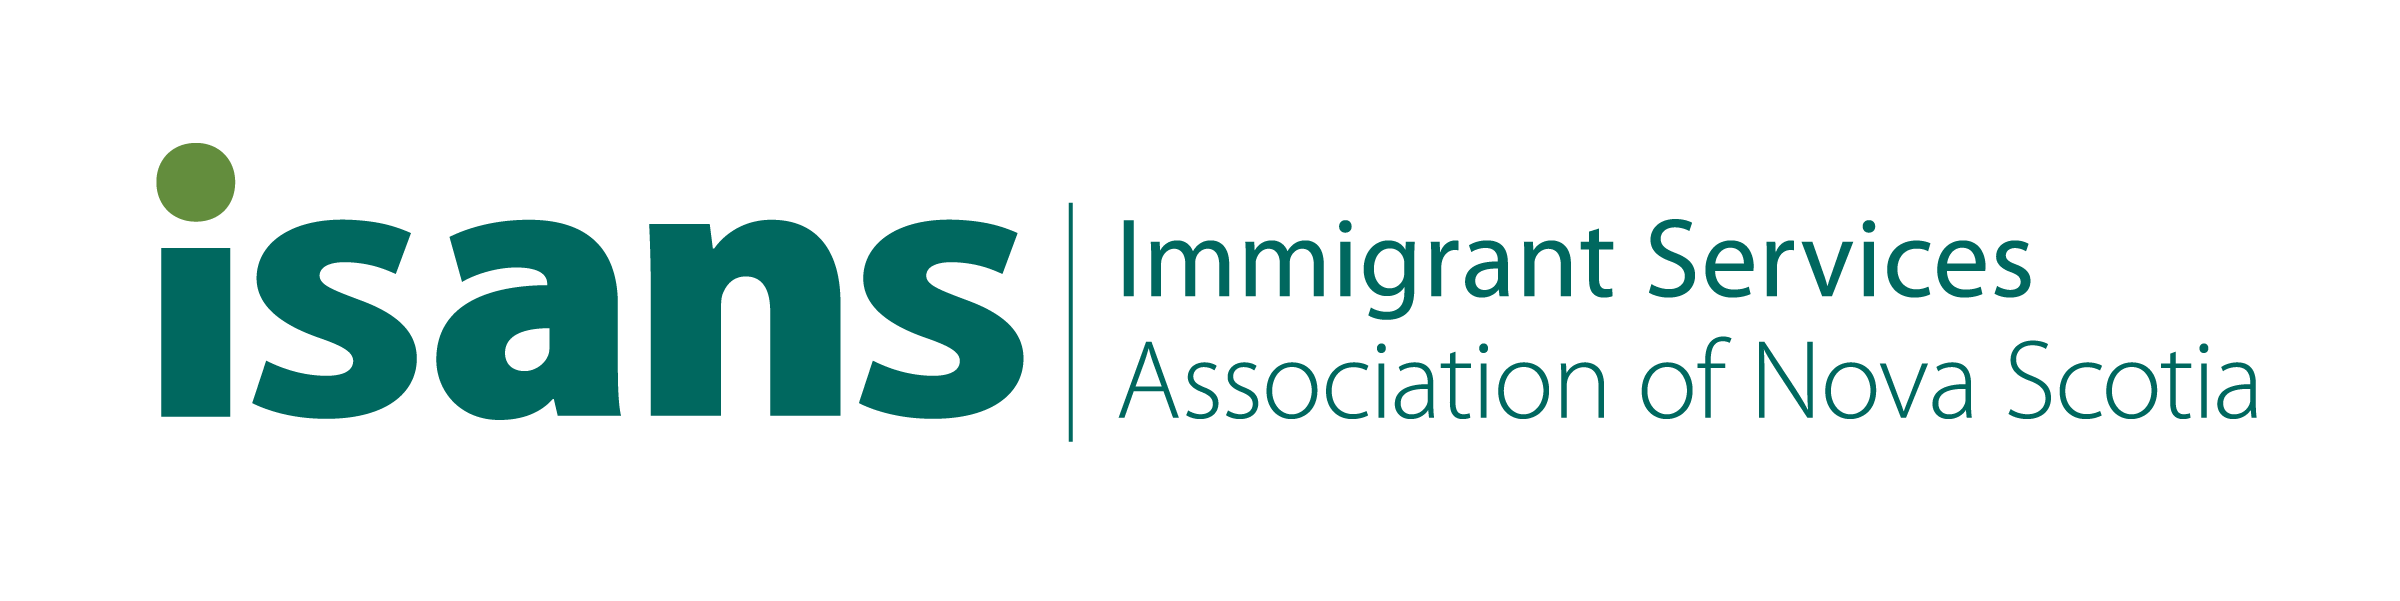 Immigrant Services Association of Nova Scotia 40 years